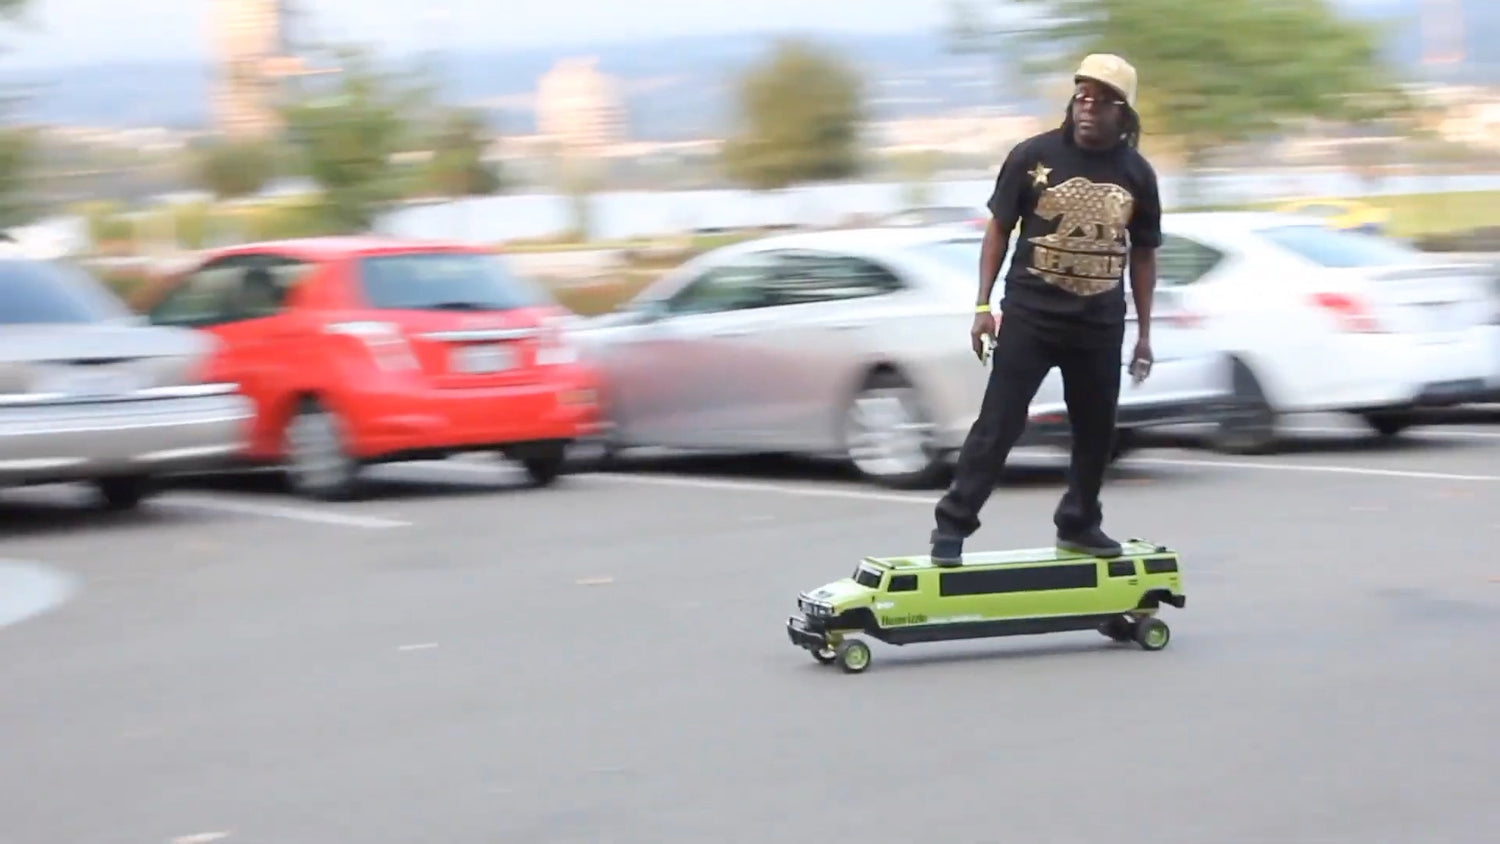 Riding FreeJac Nation luxury electric skateboard called Scraper Boards